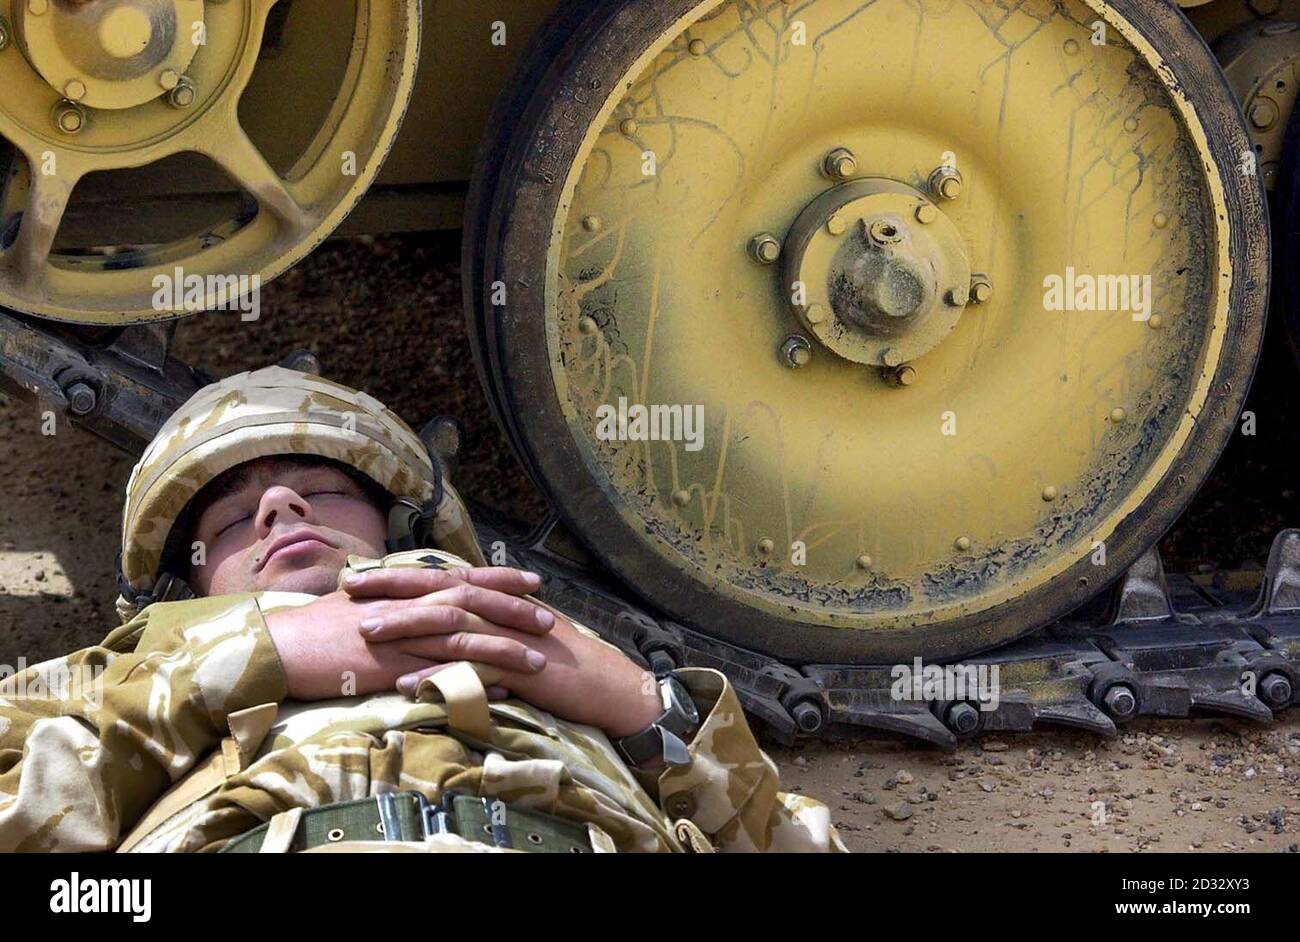 An exhausted Scimitar commander of the Household Cavalry regiment catching up on his sleep in the shade of his tank. Stock Photo